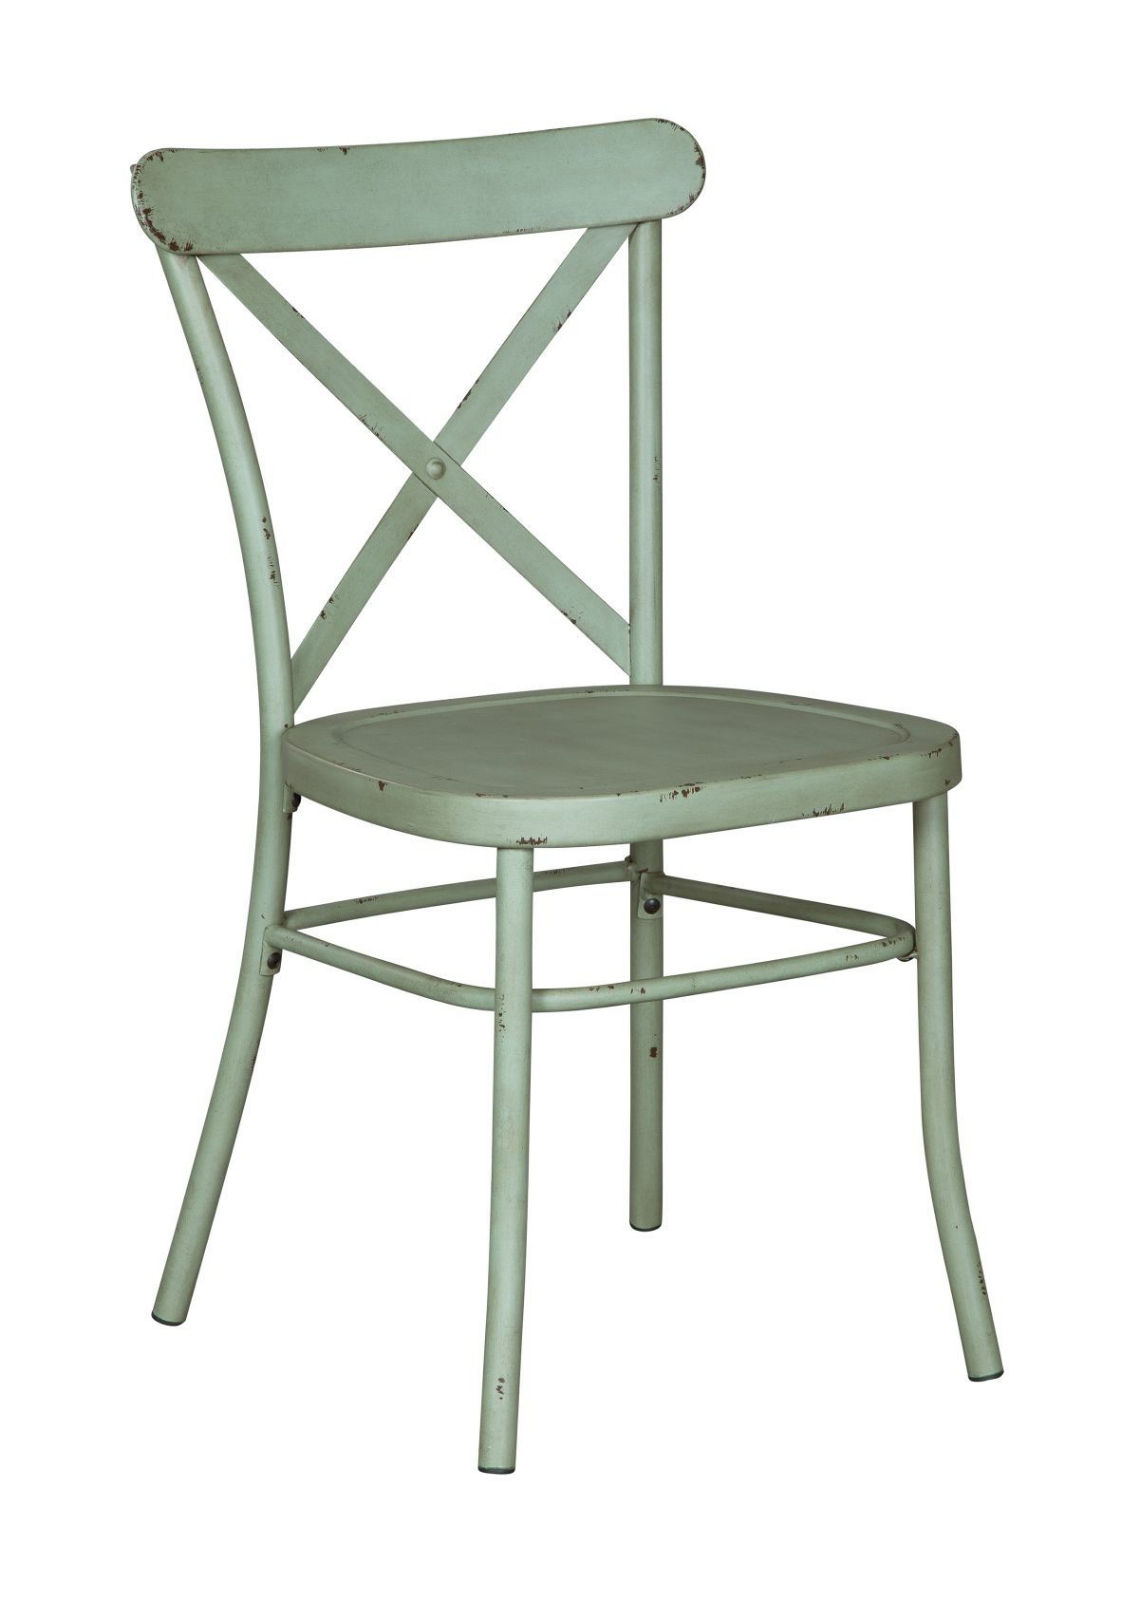 Picture of Minnona Side Chair